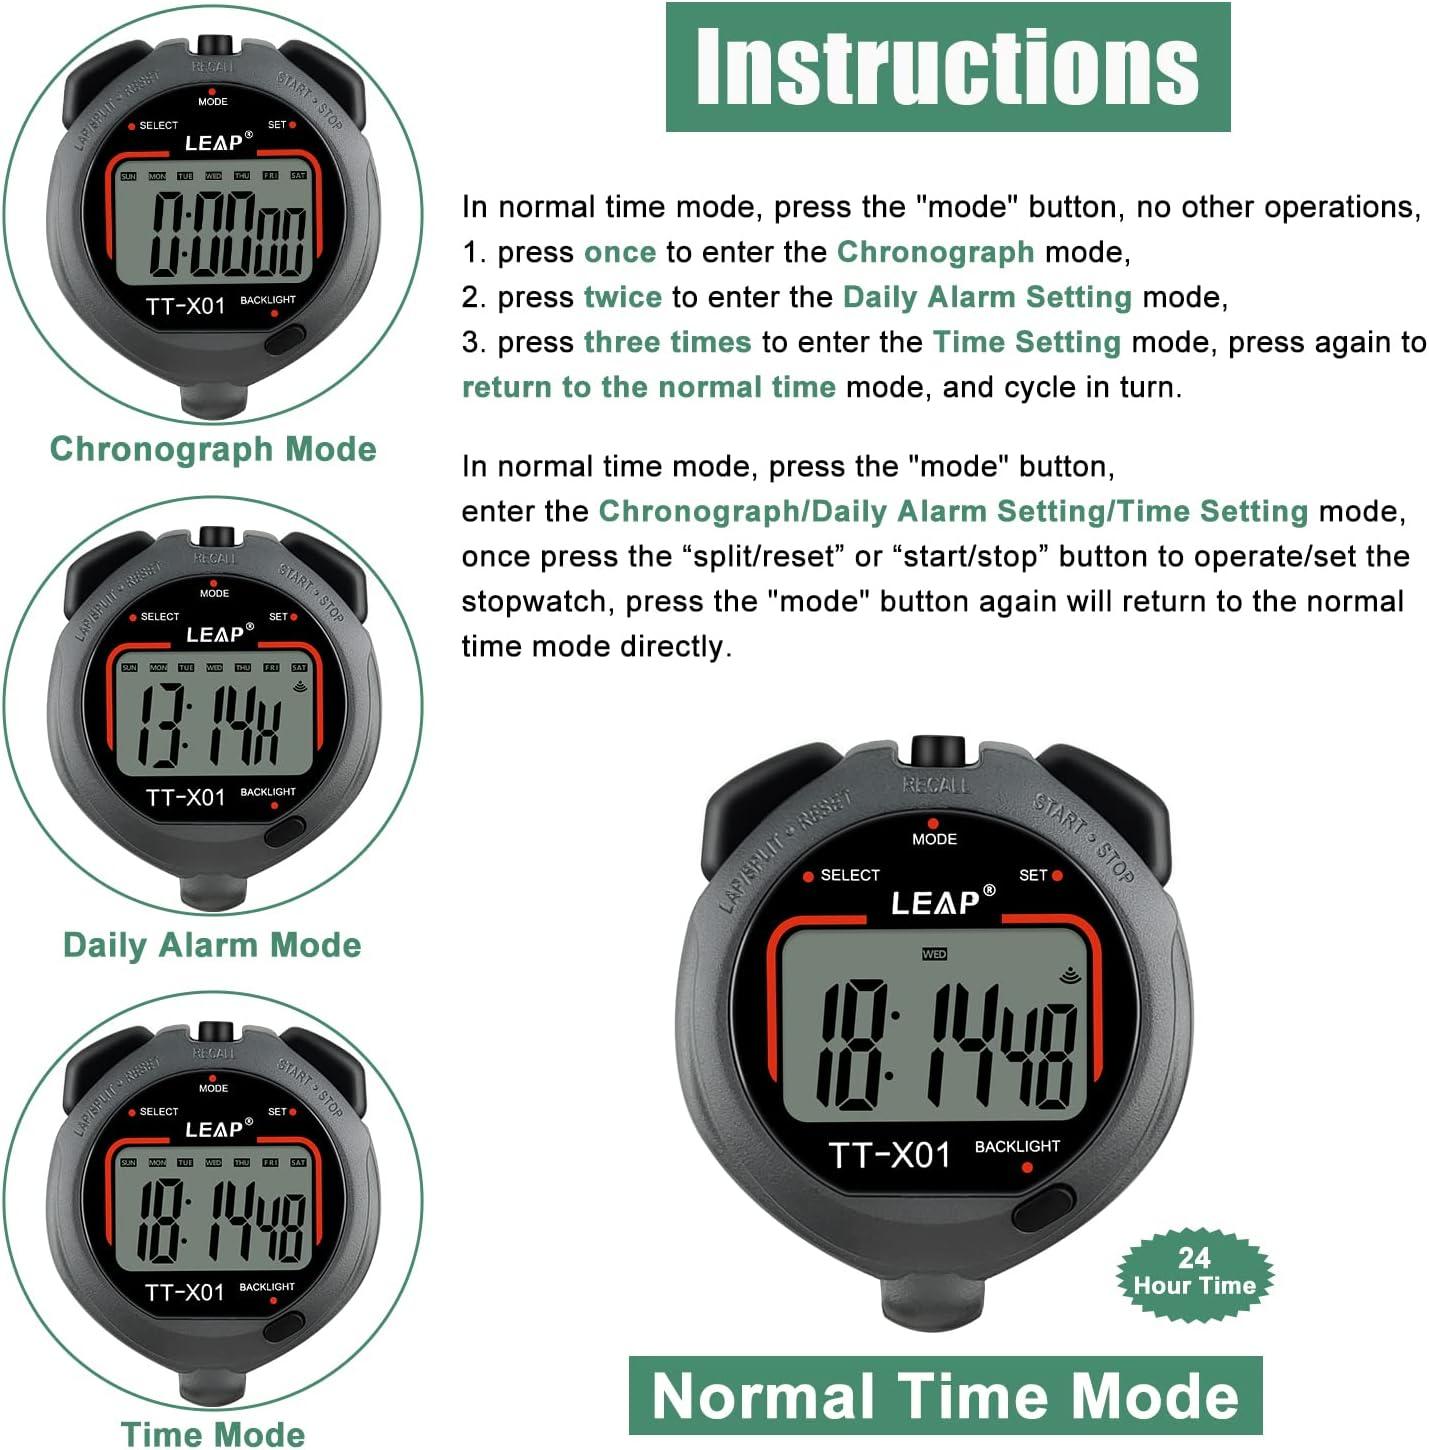 2 Pack Stopwatch Timers for Sports Digital Stopwatch Waterproof